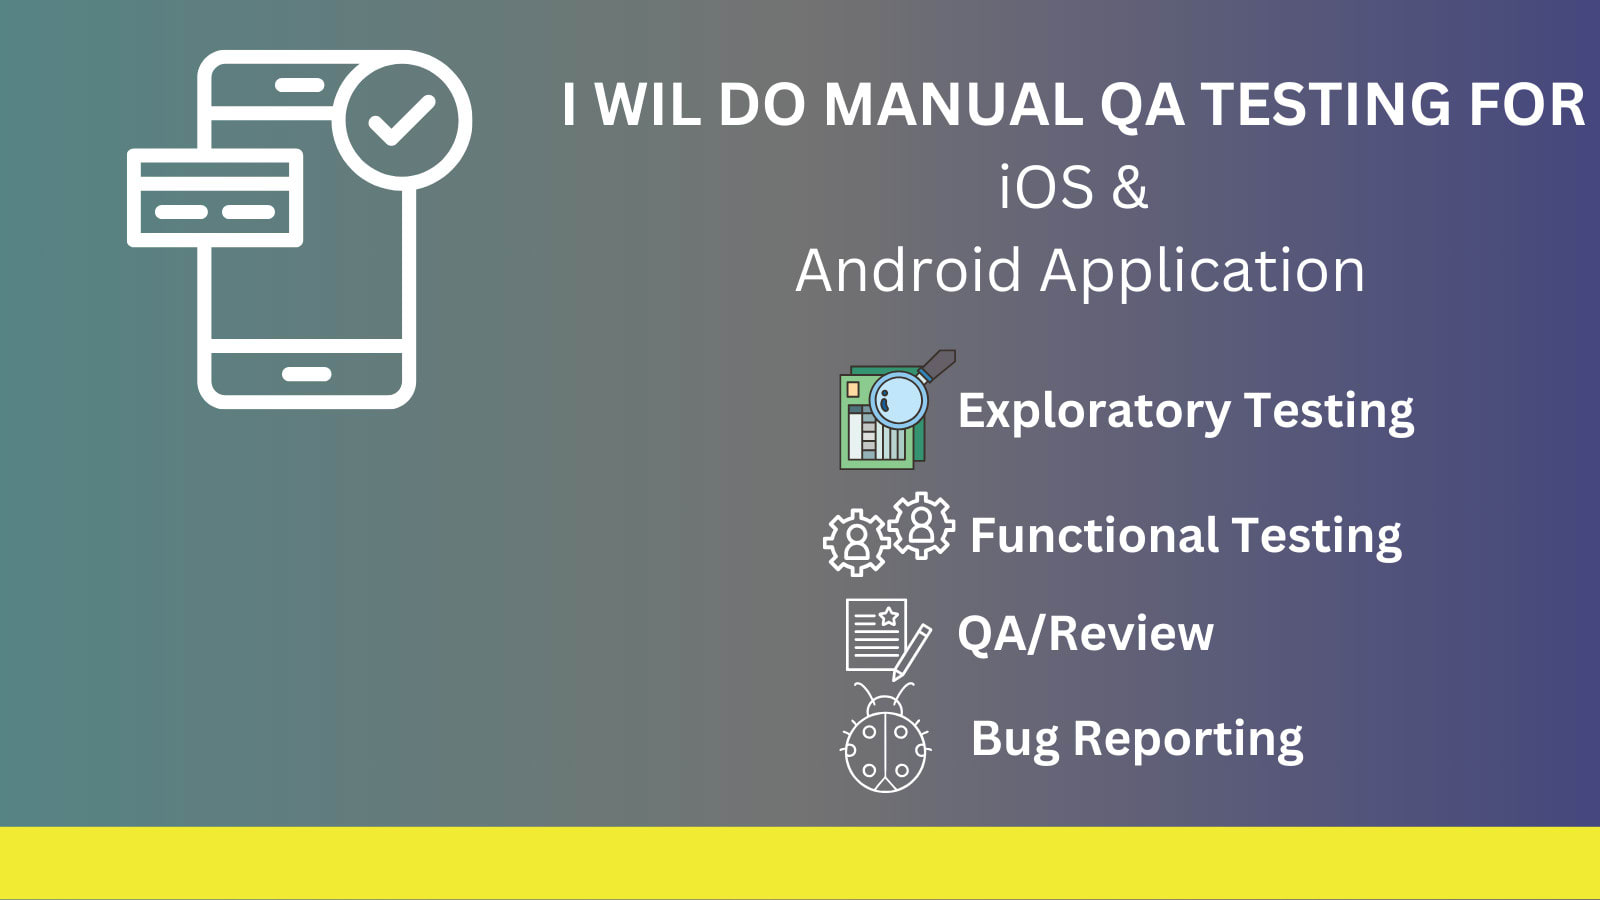 A manual exploratory testing for your iOS app, website or Android TV app